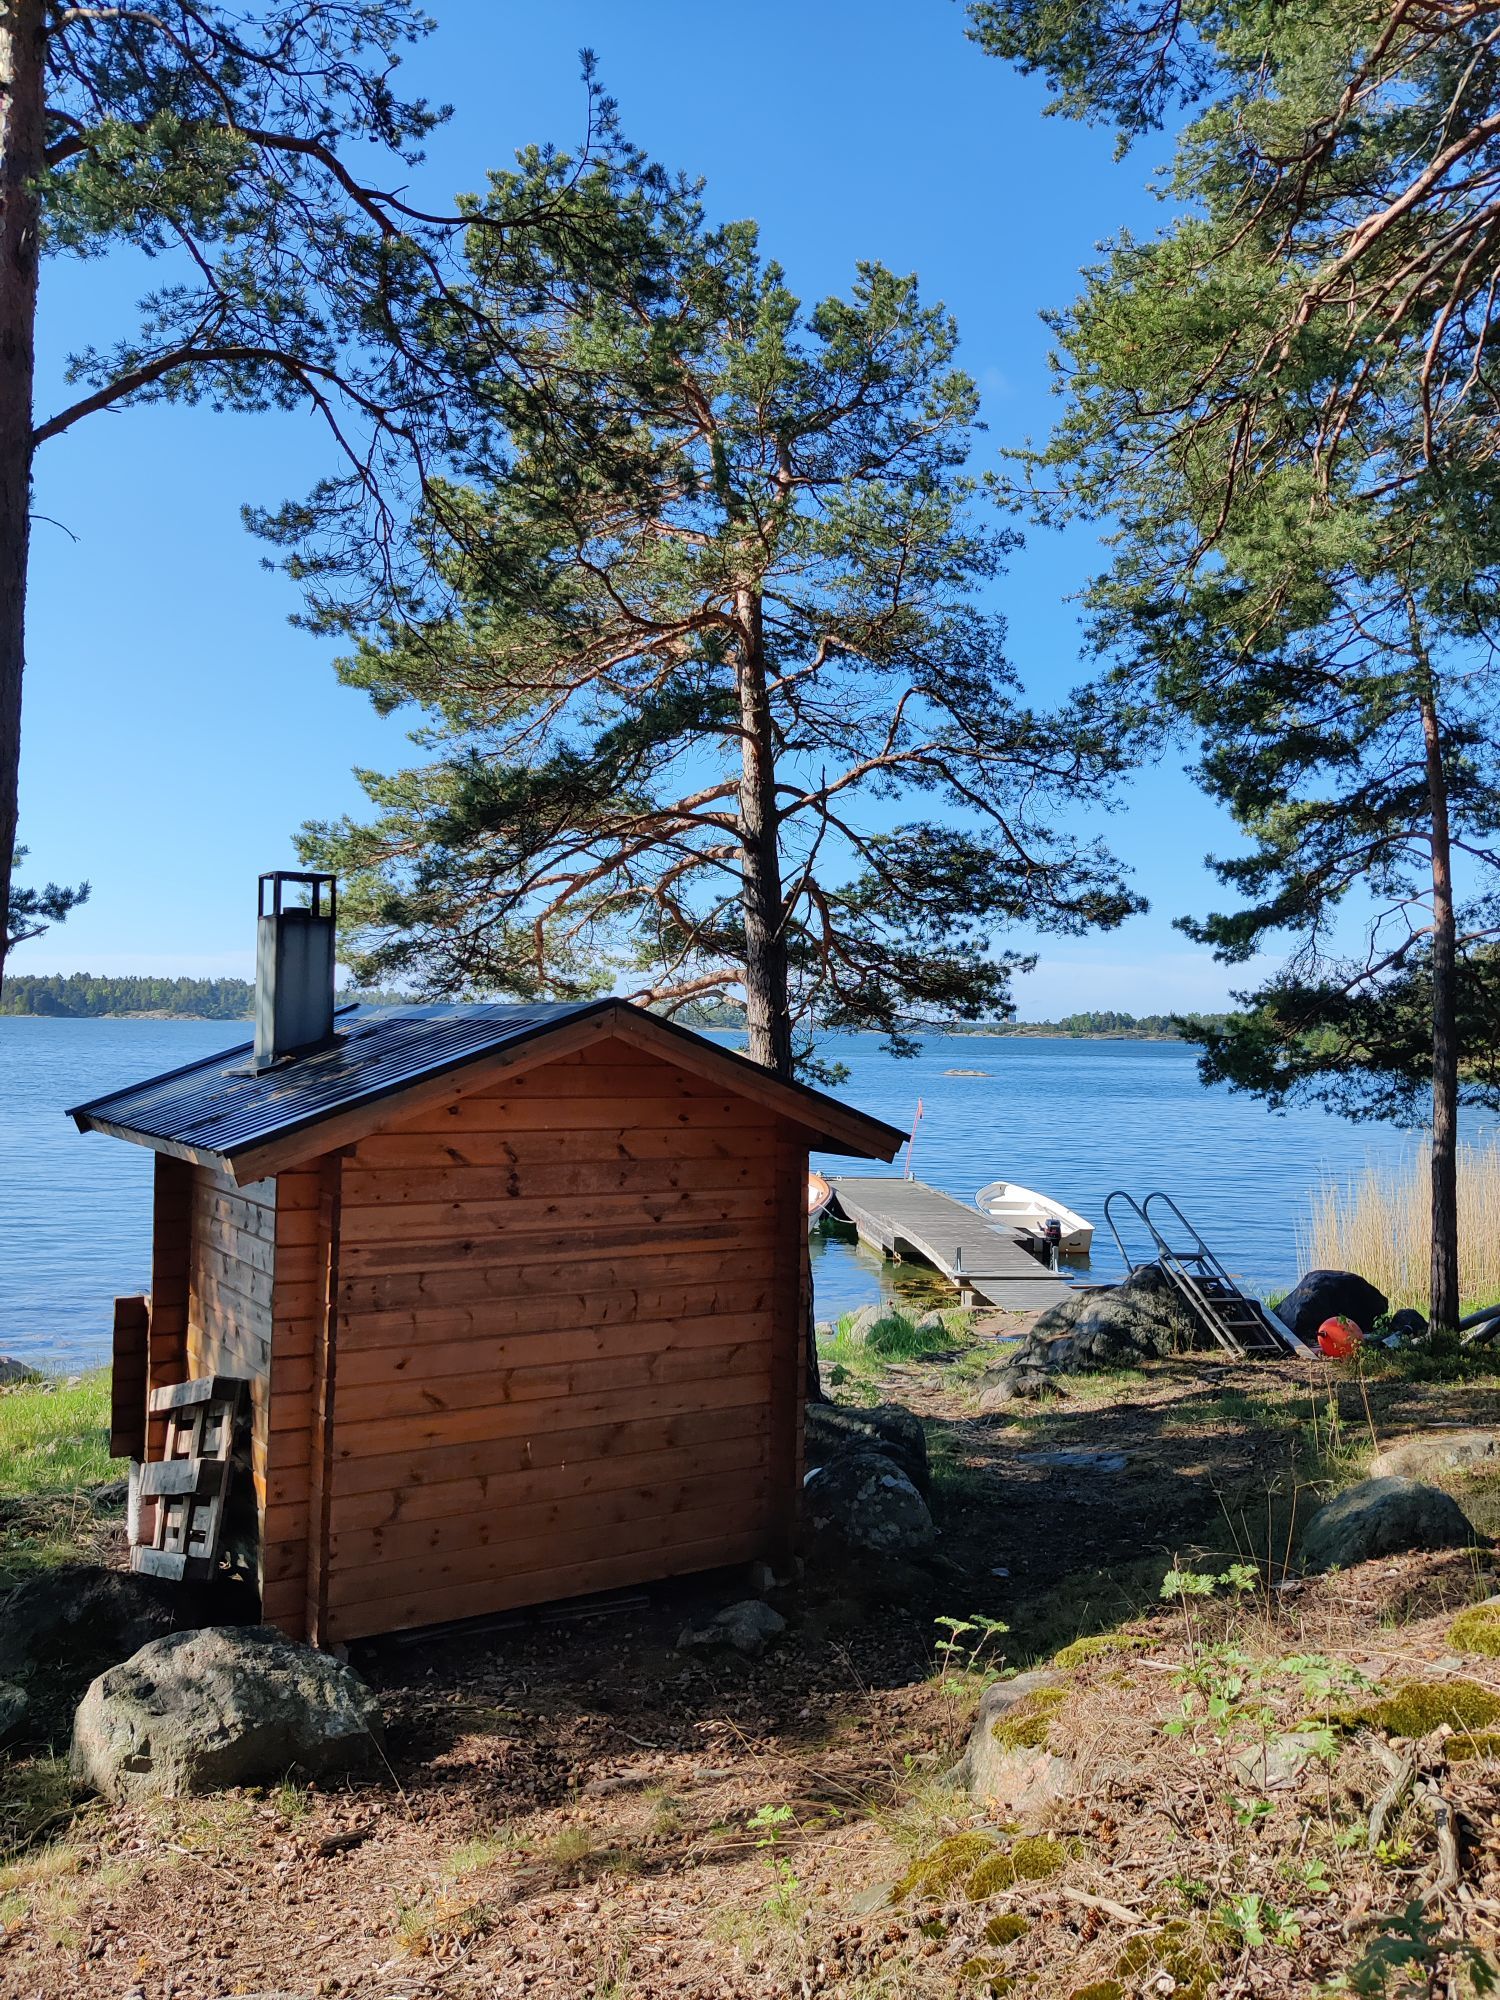 Holiday home in Nyköping with 4 + 1 beds #31713 | Stugknuten